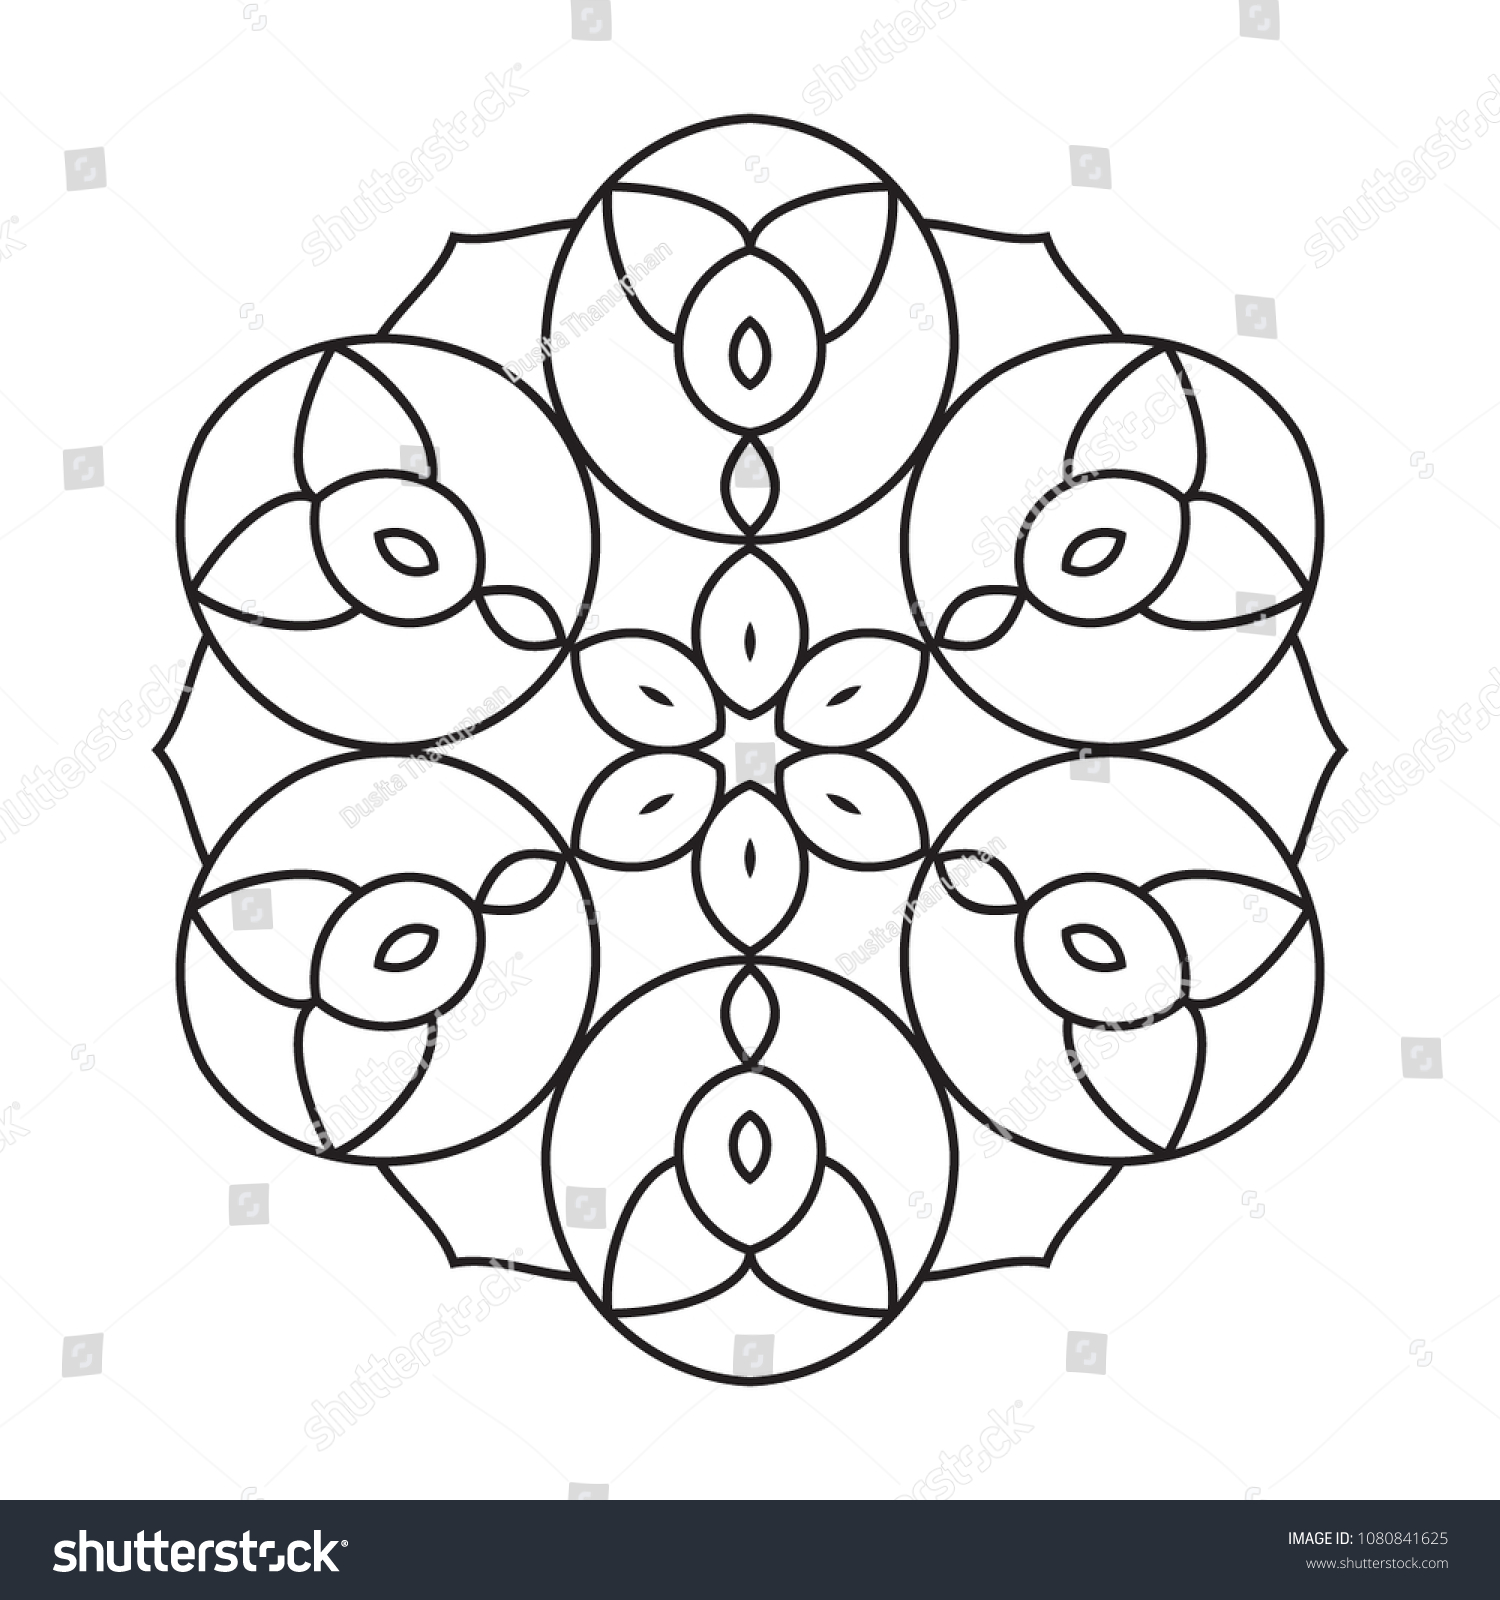 Easy mandala basic simple coloring pages stock illustration